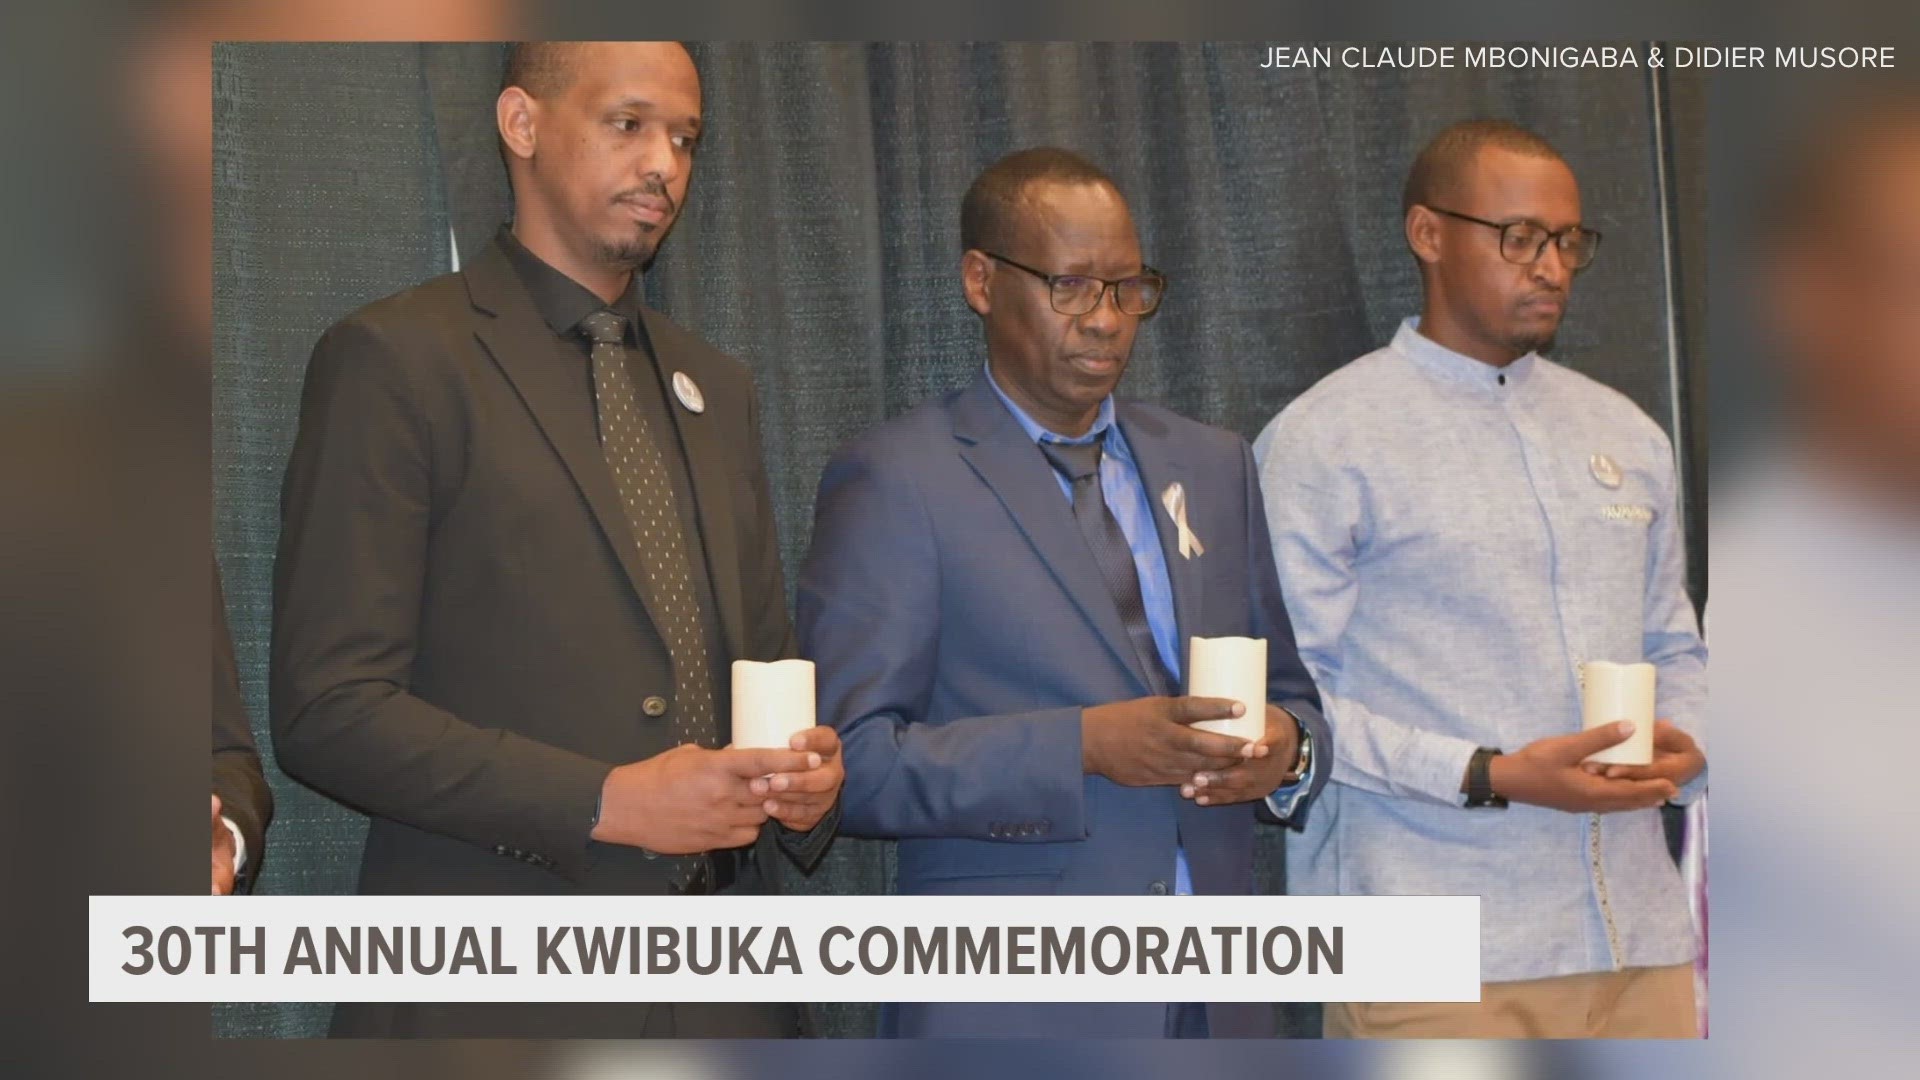 The Rwandan Community of Iowa is hosting a Kwibuka event Saturday. Local 5's Larissa Milles spoke with event organizers about what the ceremony means to them.